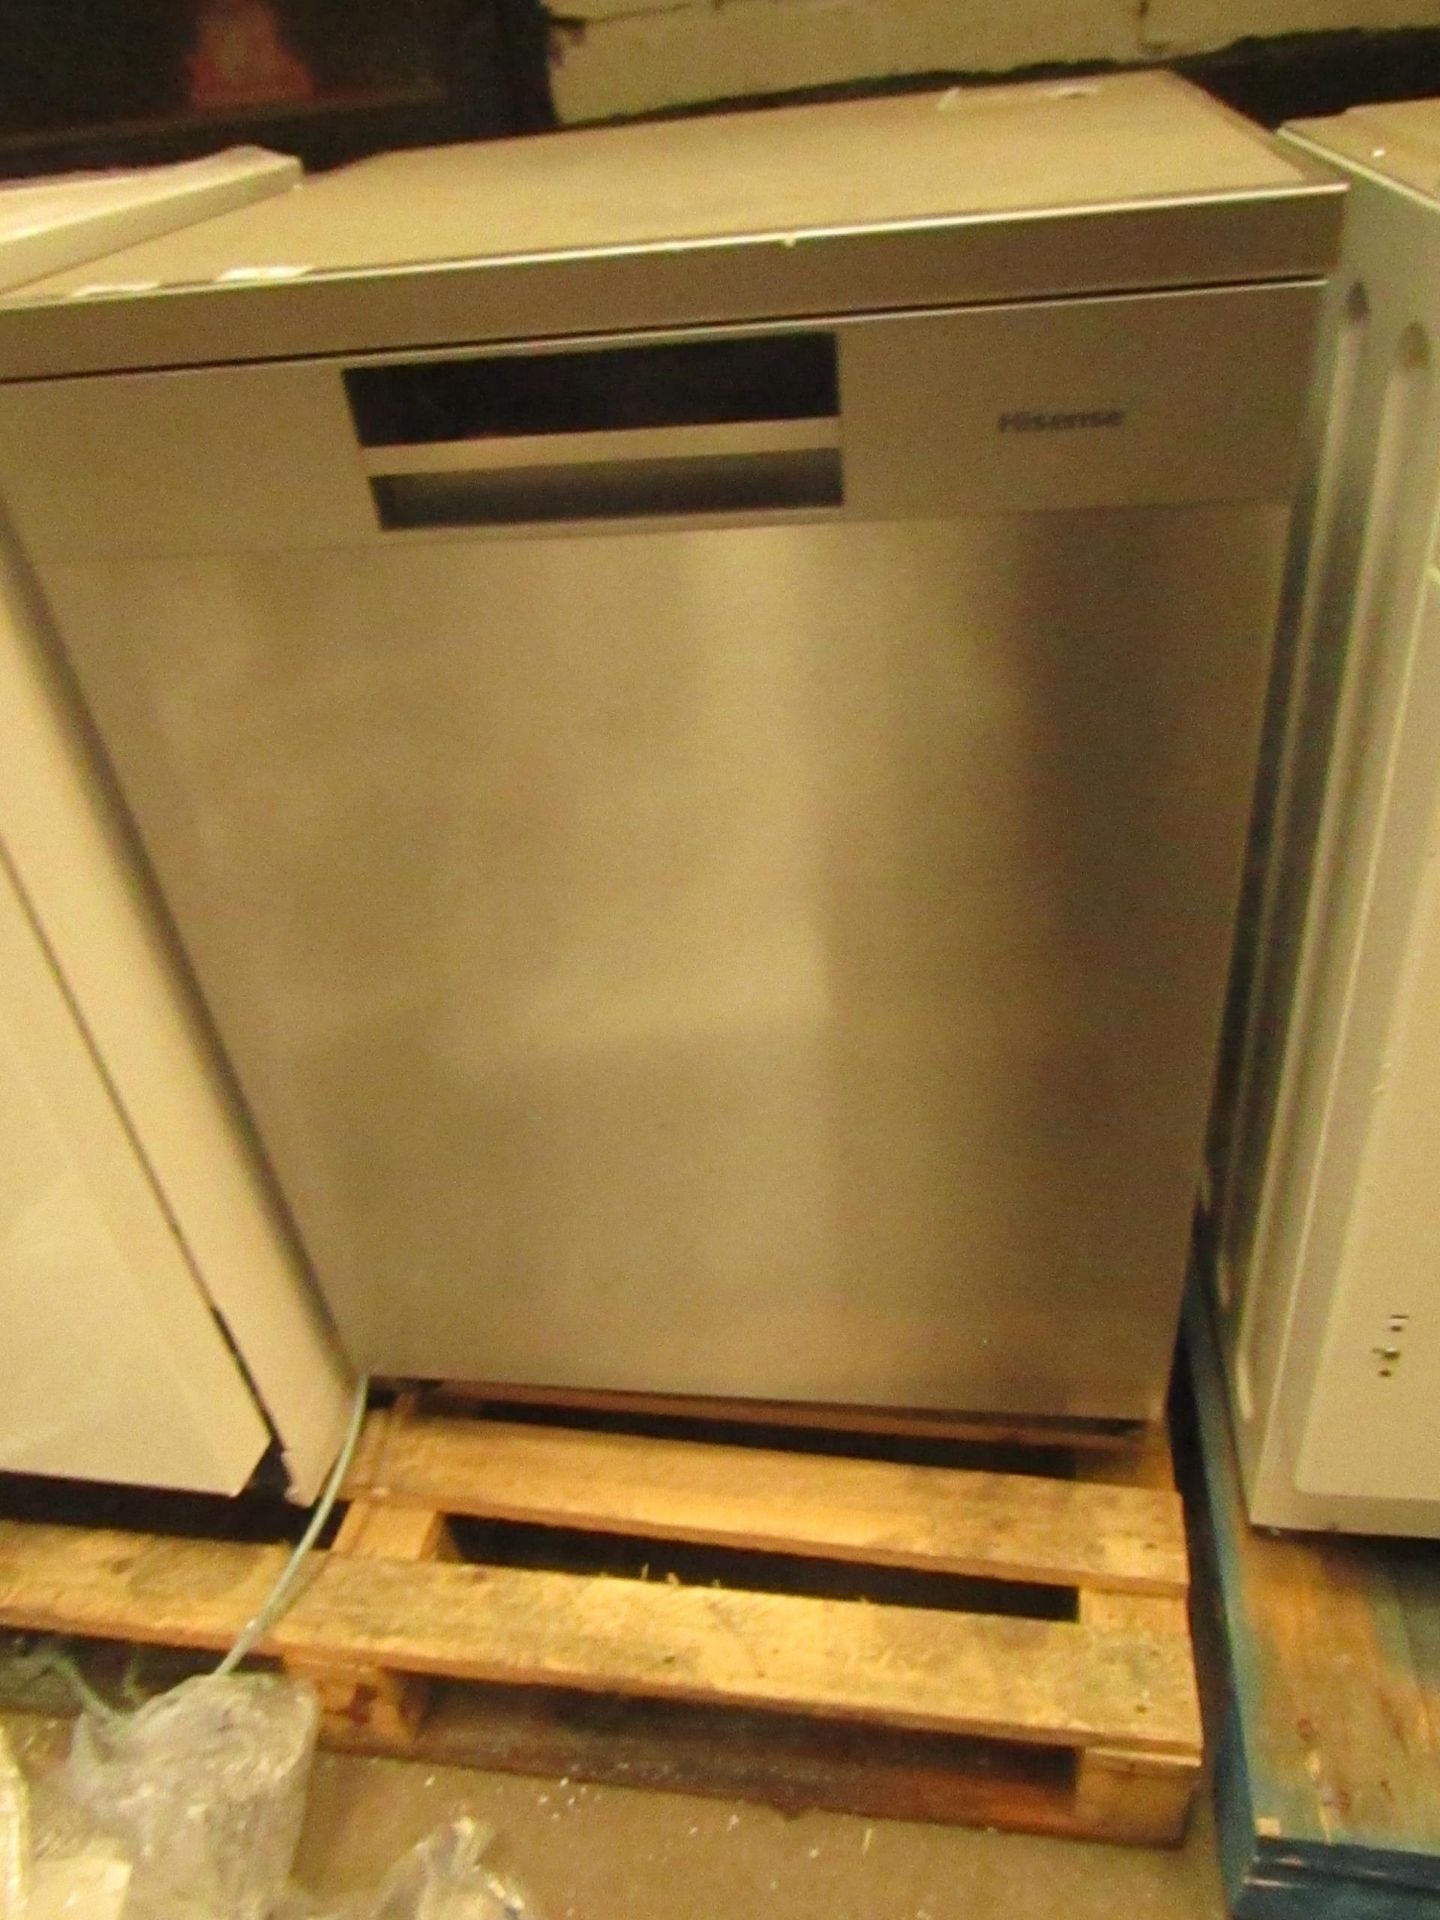 Hisense HS661C60xUK Freestanding Dishwasher, powers on and looks fairly clean inside, the door